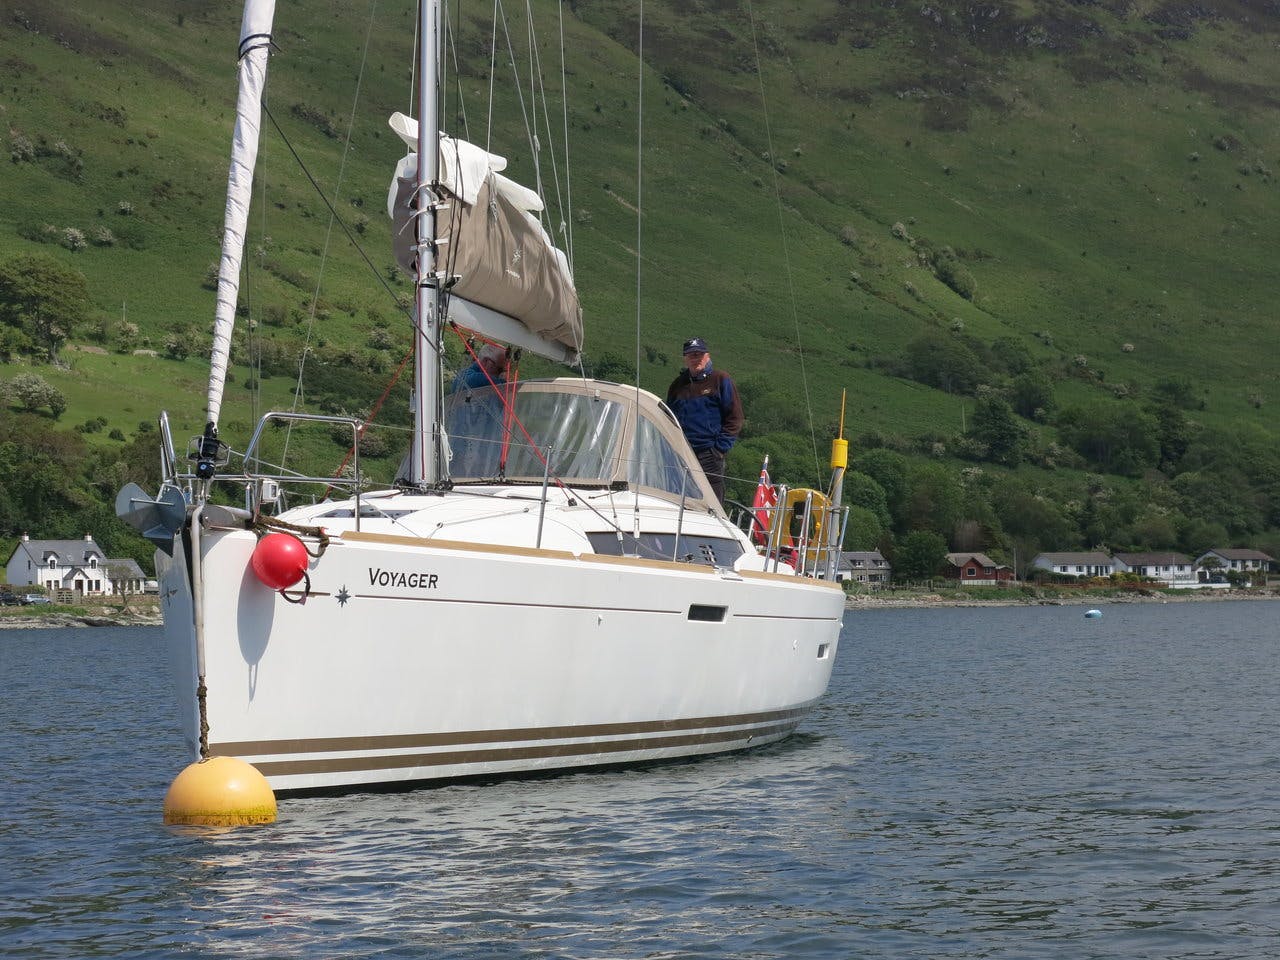 Book Sun Odyssey 379 Sailing yacht for bareboat charter in Largs Yacht Haven, North Ayrshire, Scotland, UK  with TripYacht!, picture 3